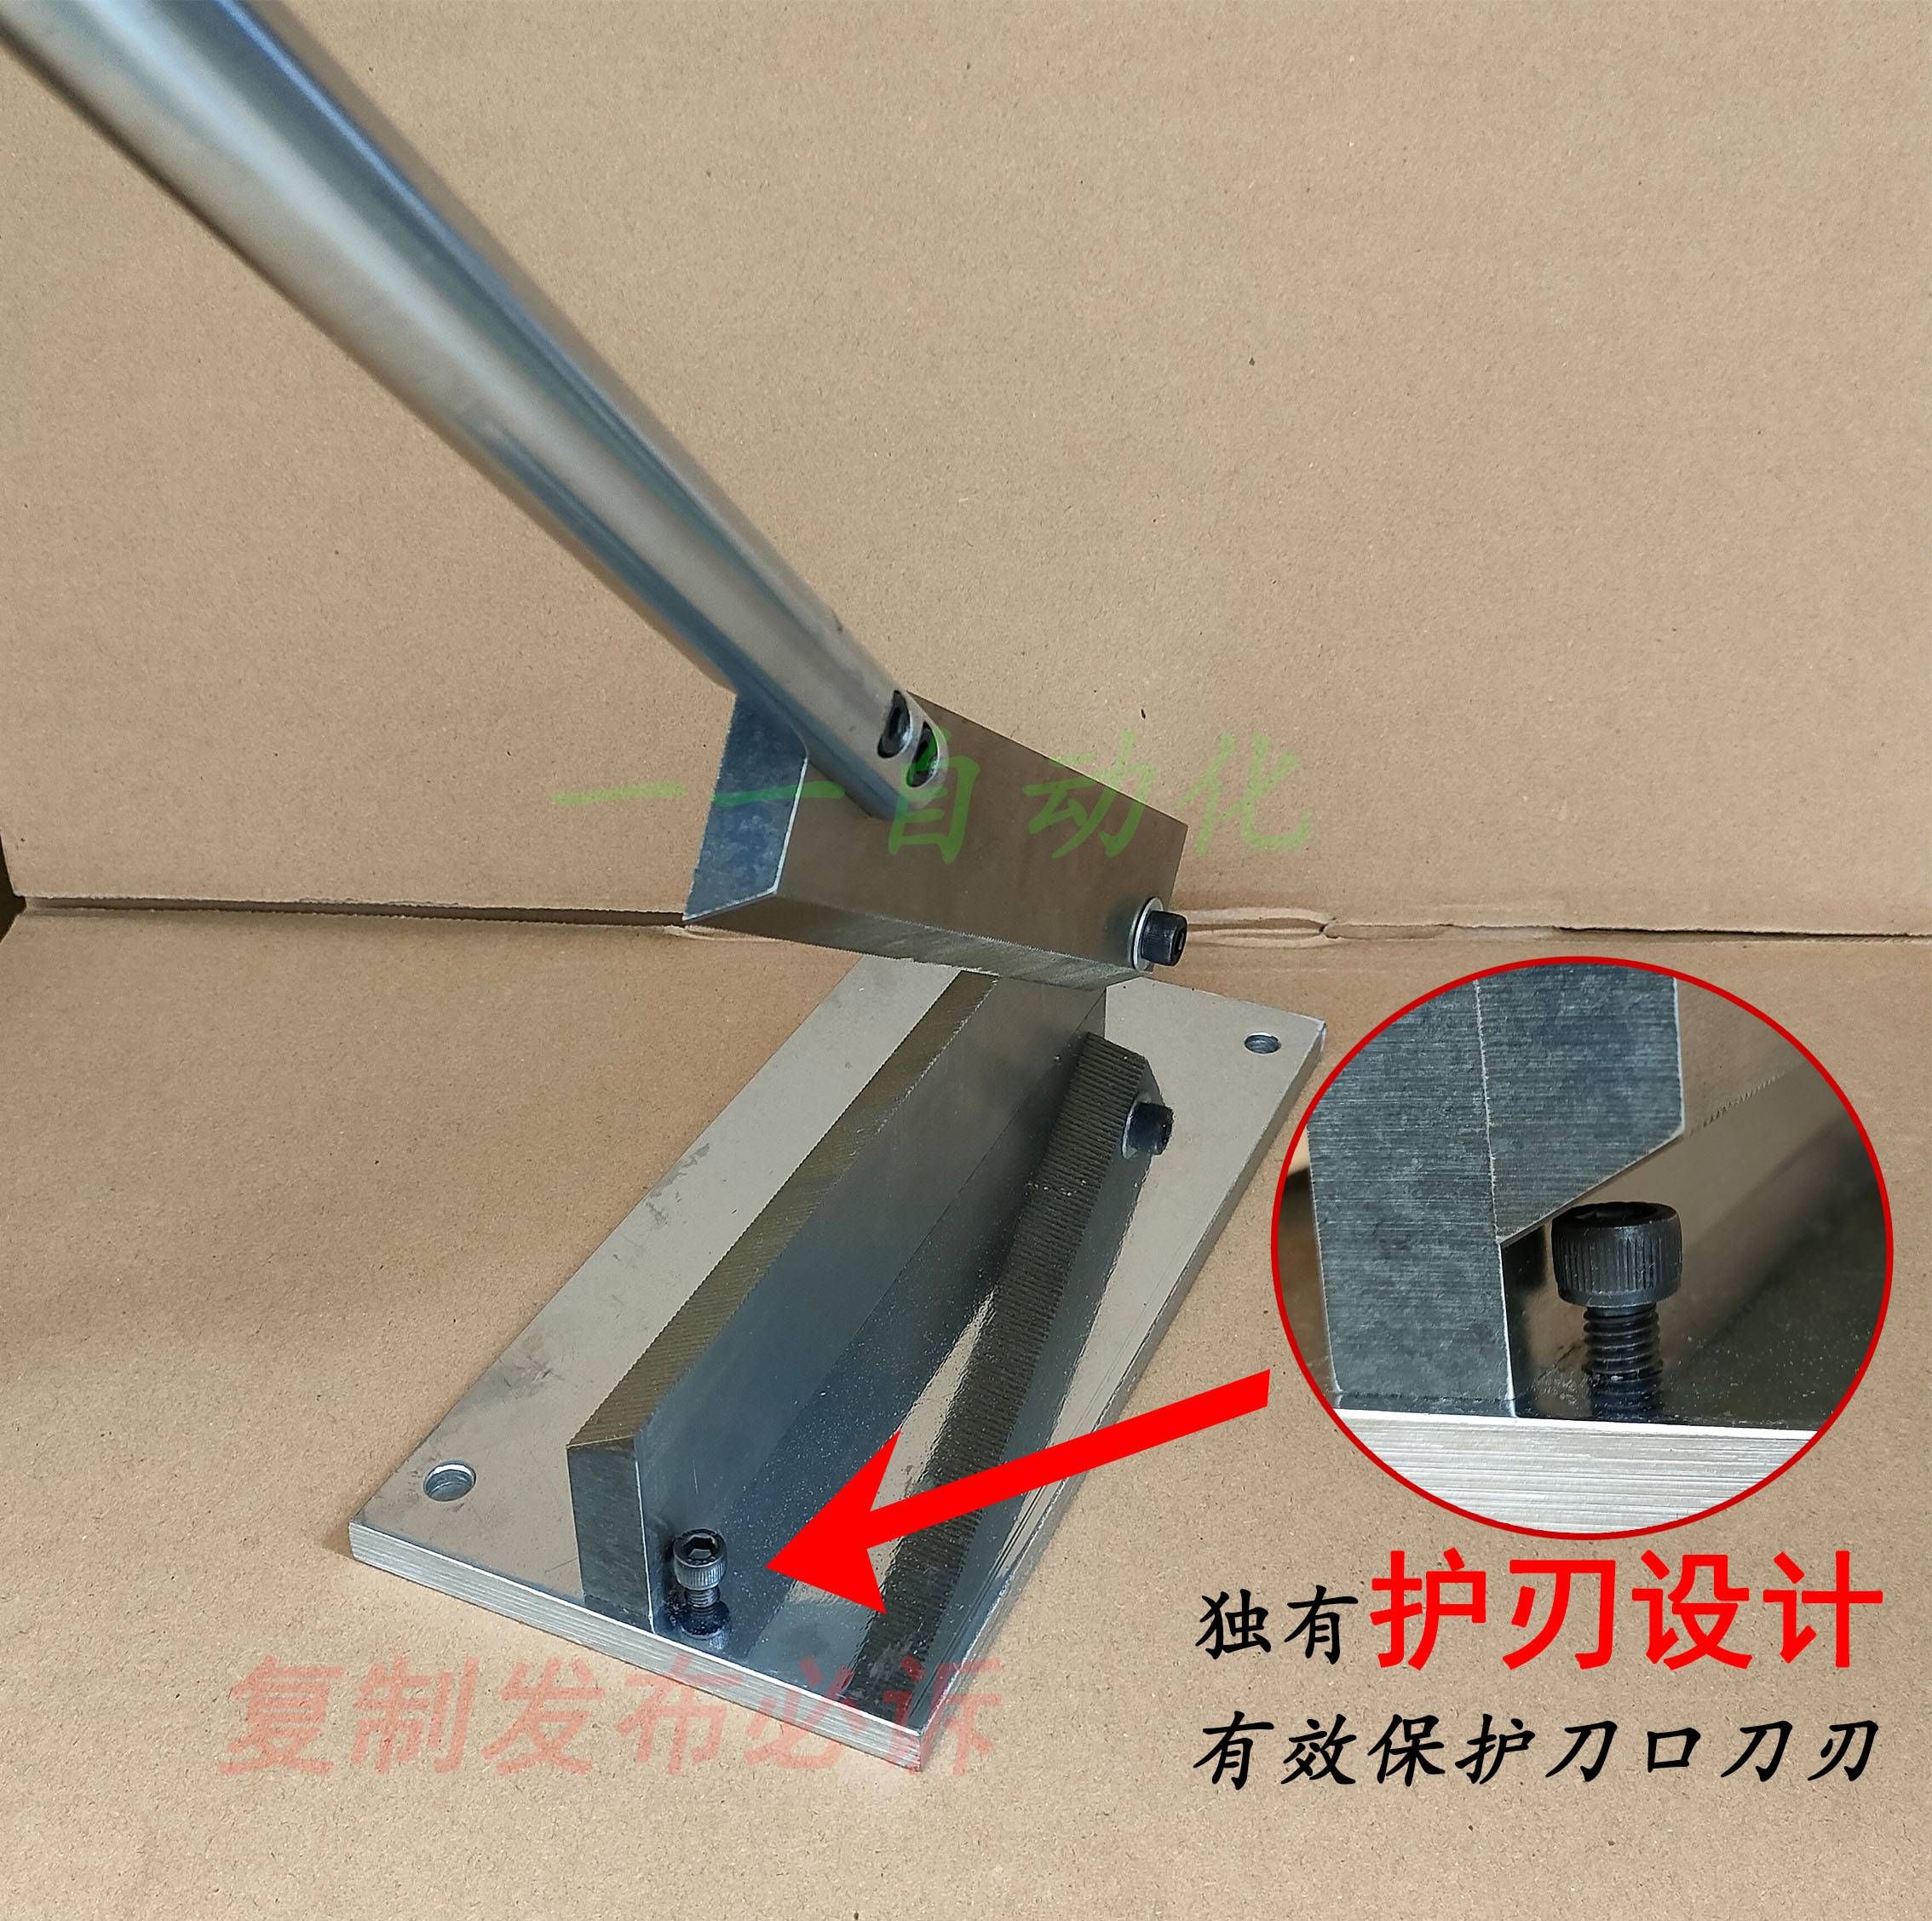 Cable cut cutting knife big brake knife manual tangent knife data power cord cutting copper wire plant quality with teeth cutter-Taobao